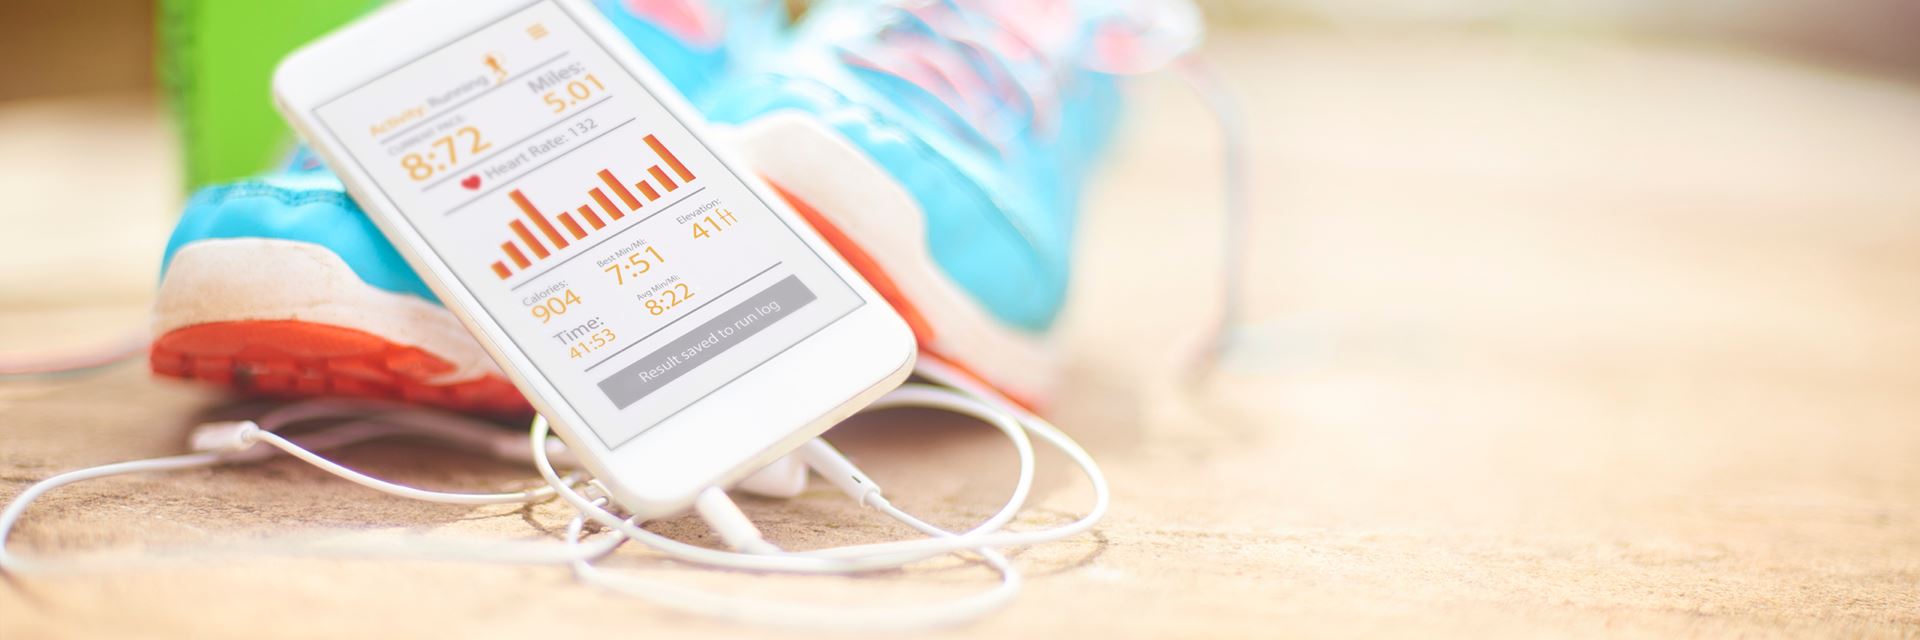 Fitness and health apps